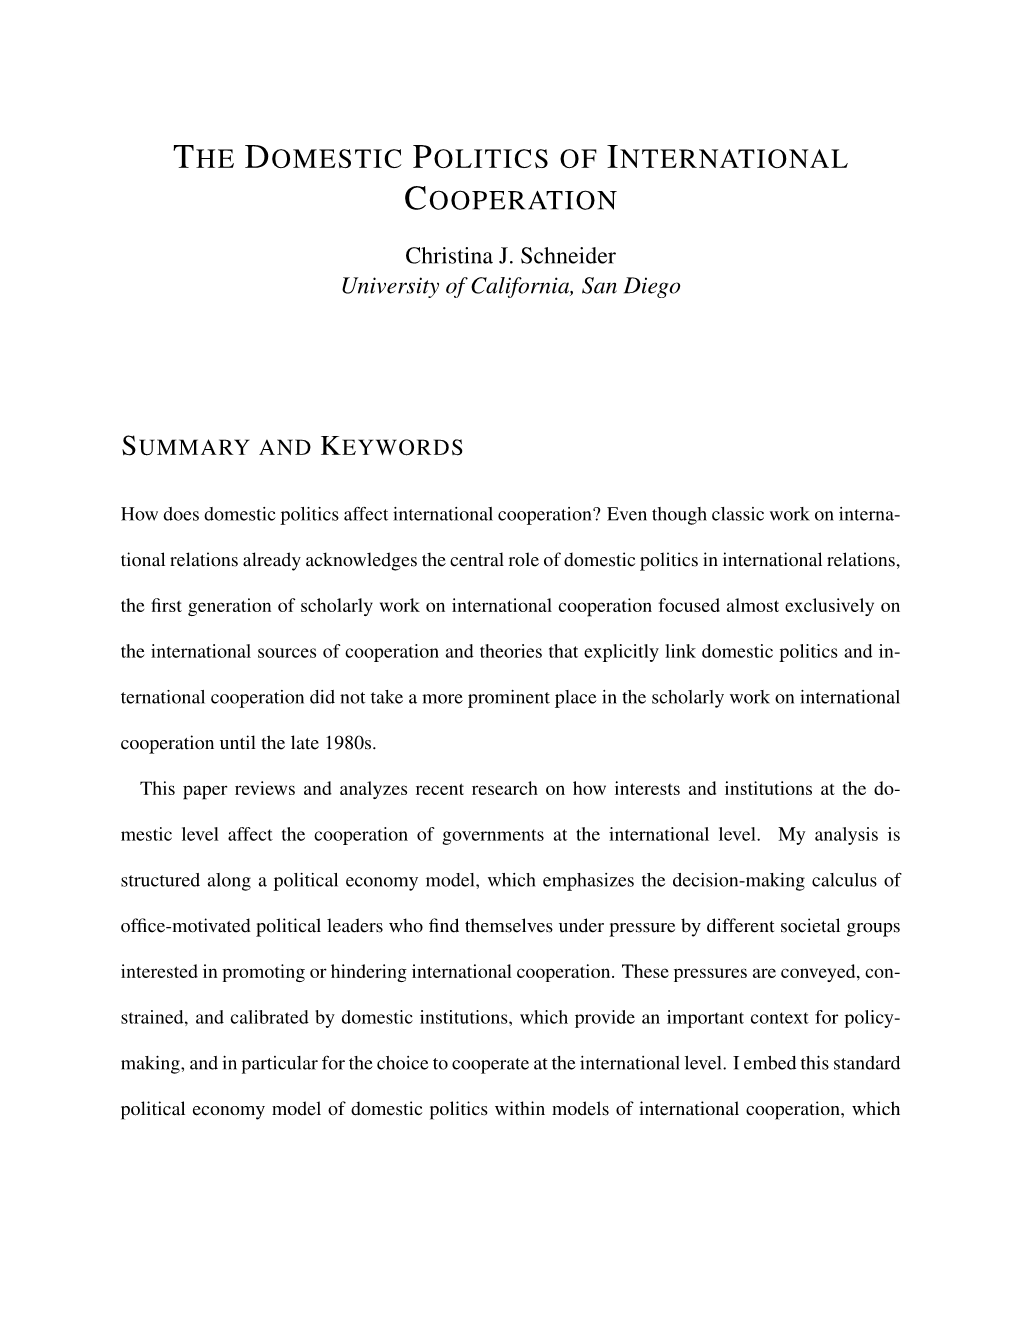 The Domestic Politics of International Cooperation, Taking the Different Dimensions of International Cooperation As the Explanadum